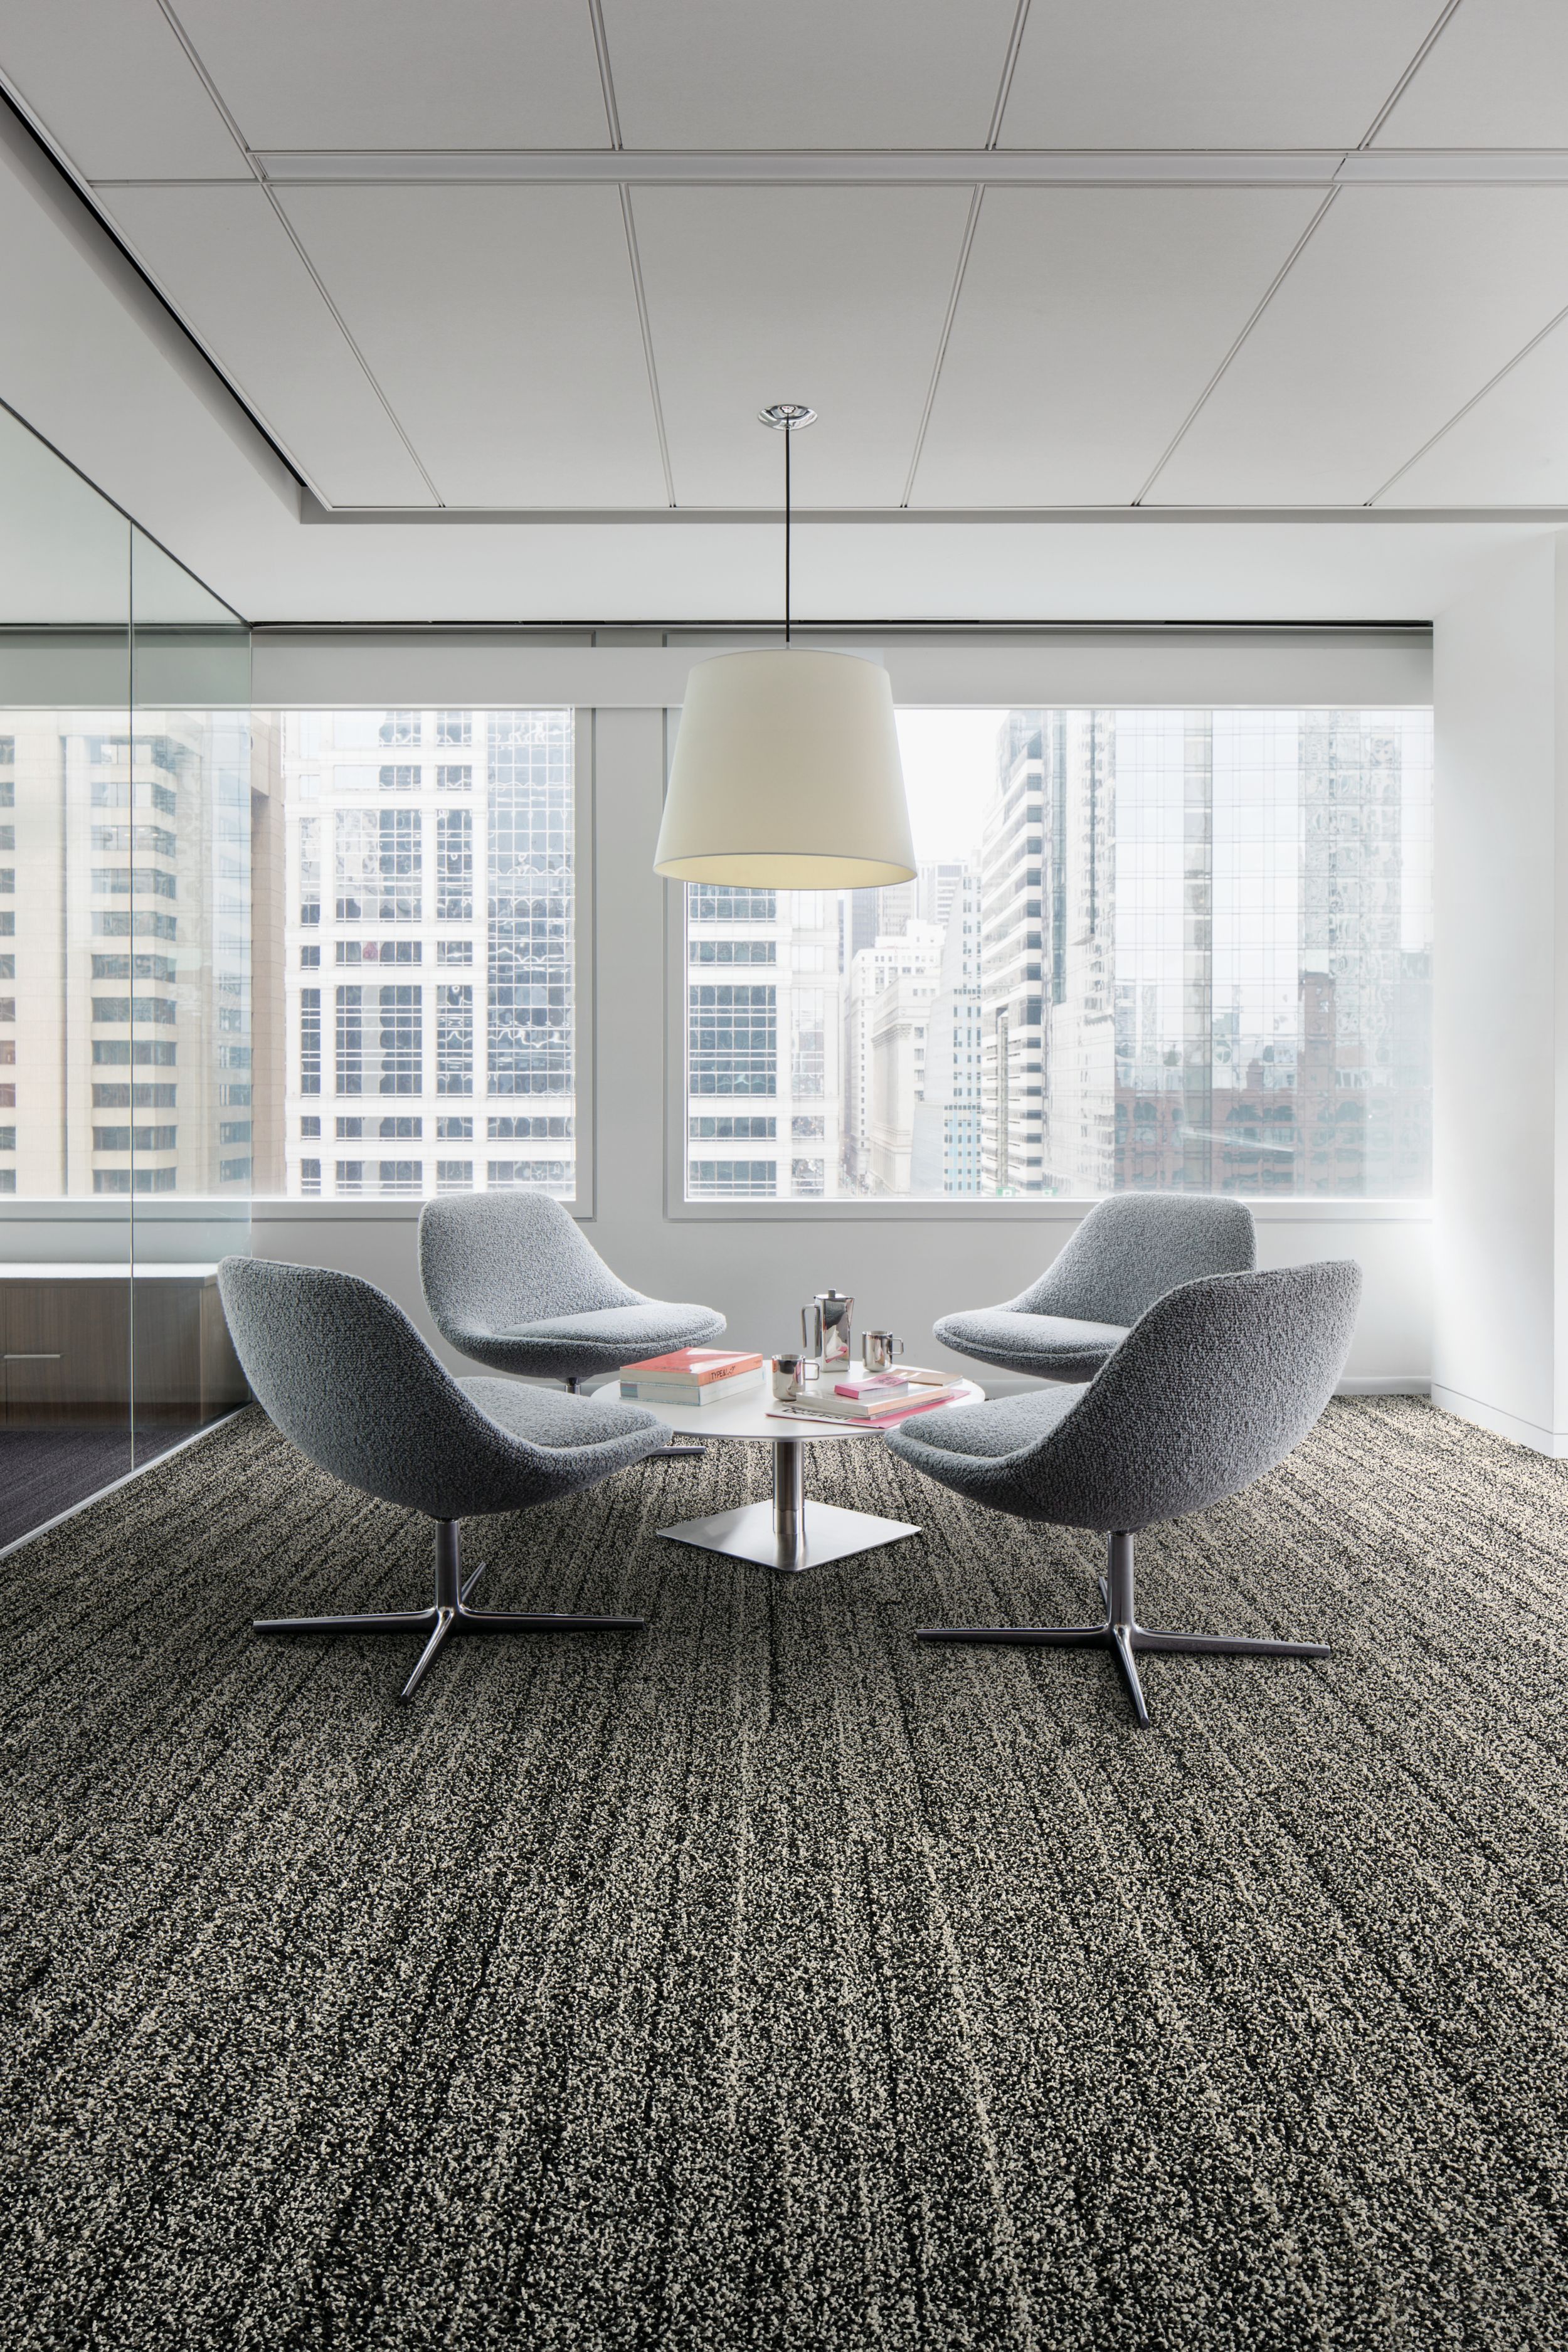 Interface Overedge plank carpet tile with fabric chairs around round table numéro d’image 6